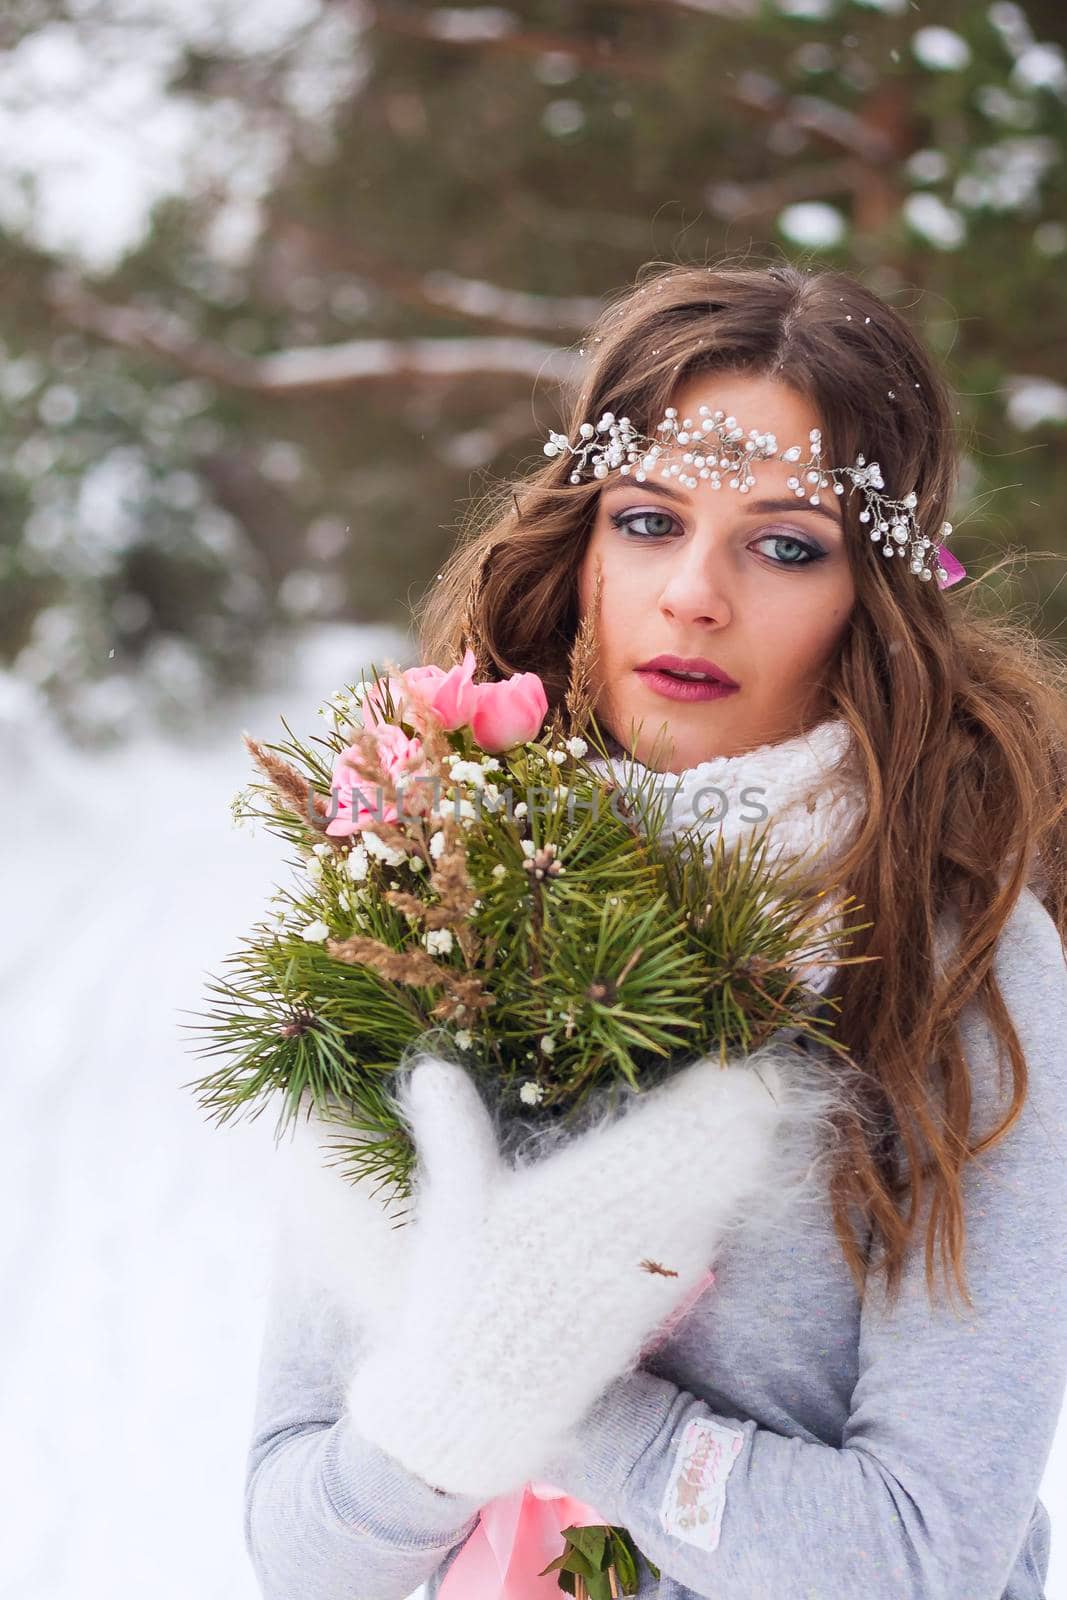 Beautiful bride in a white dress with a bouquet in a snow-covered winter forest. Portrait of the bride in nature. by Annu1tochka